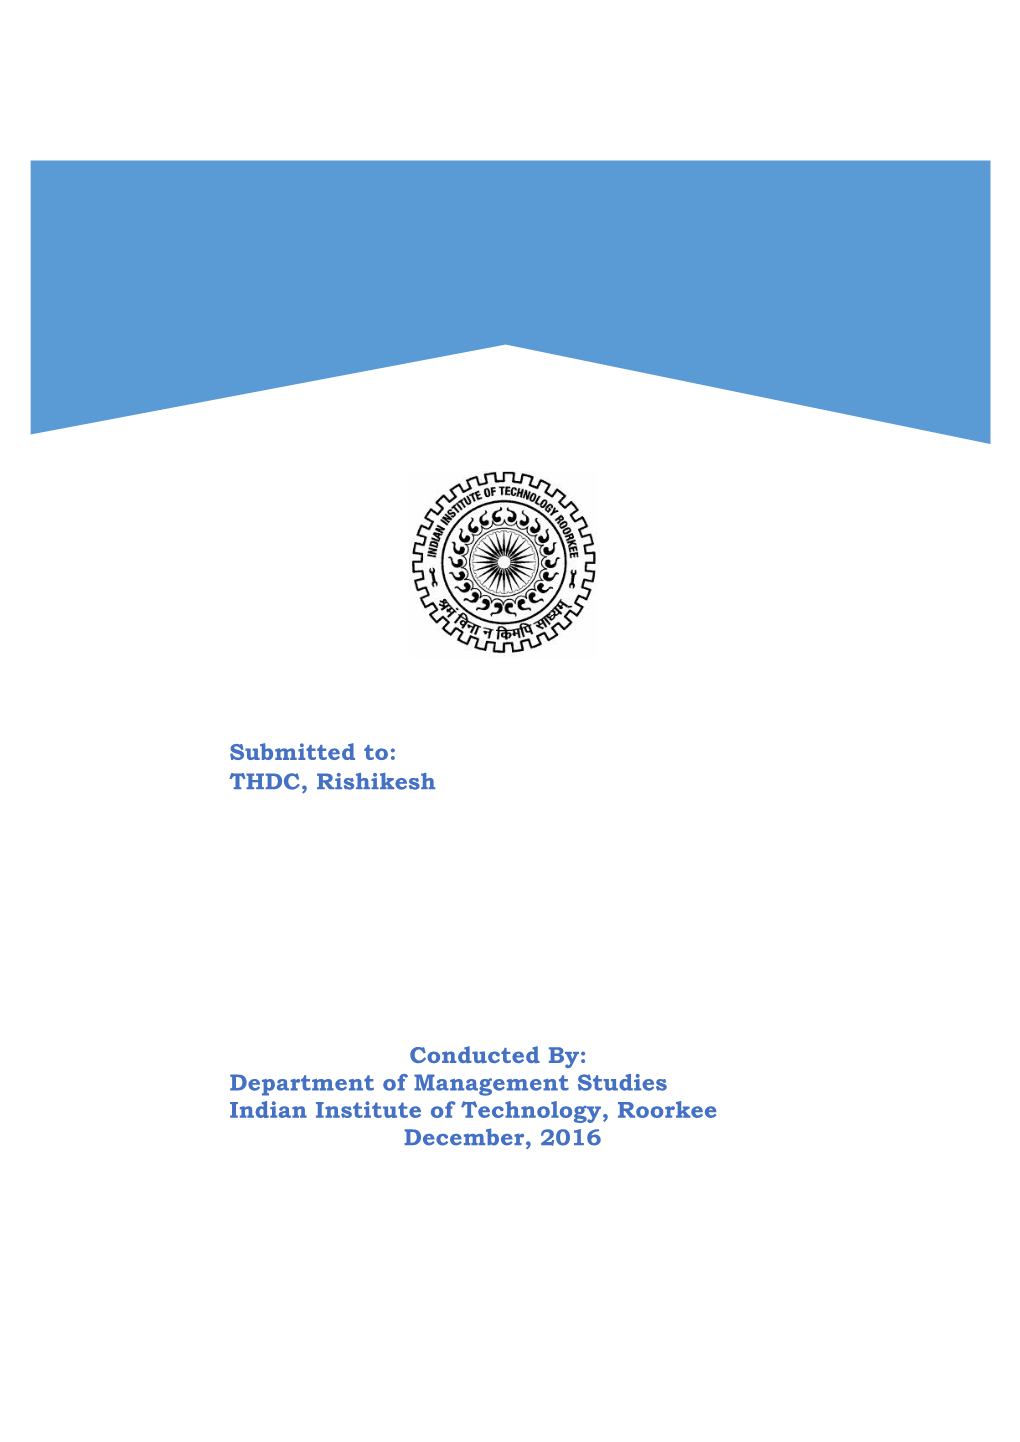 Report on Impact Assessment of Corporate Social Responsibility (Csr) Initiatives of Thdc